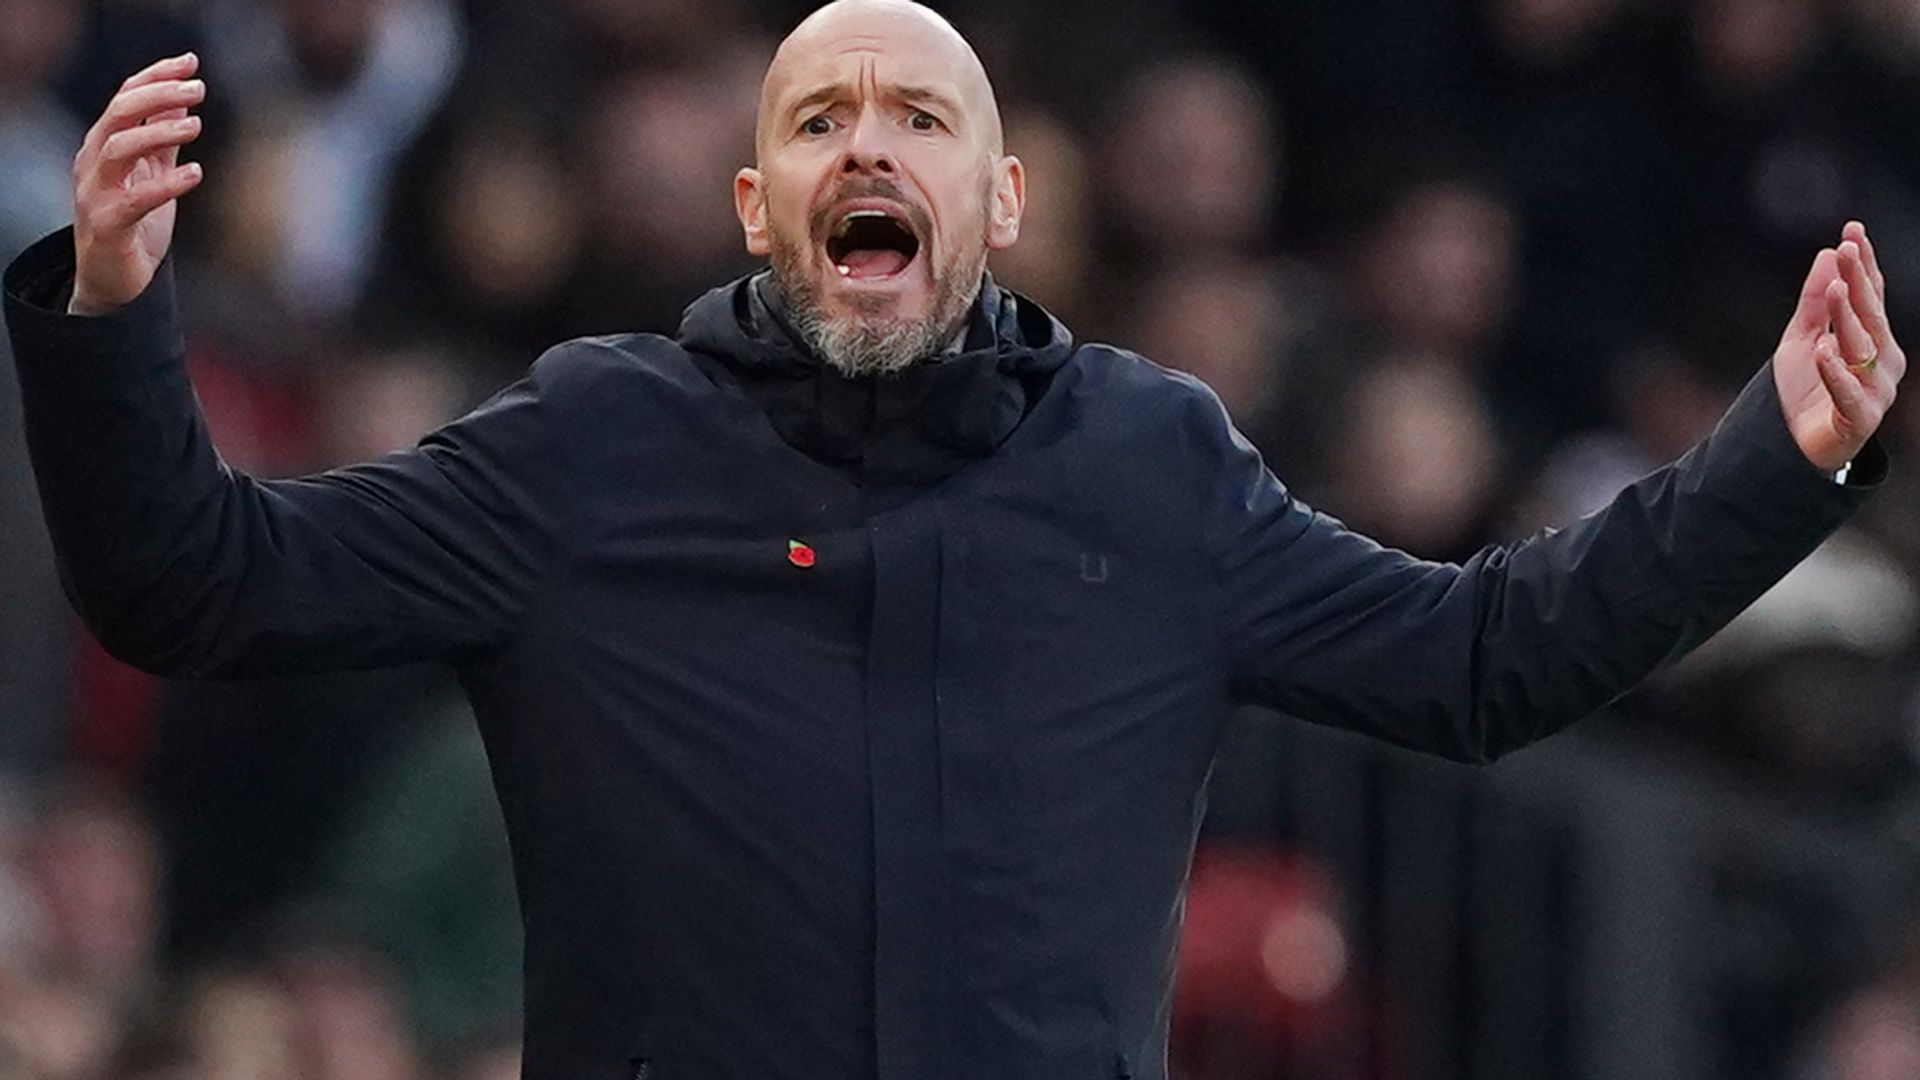 Ten Hag: I was told not to join Man Utd - but I wanted the challenge